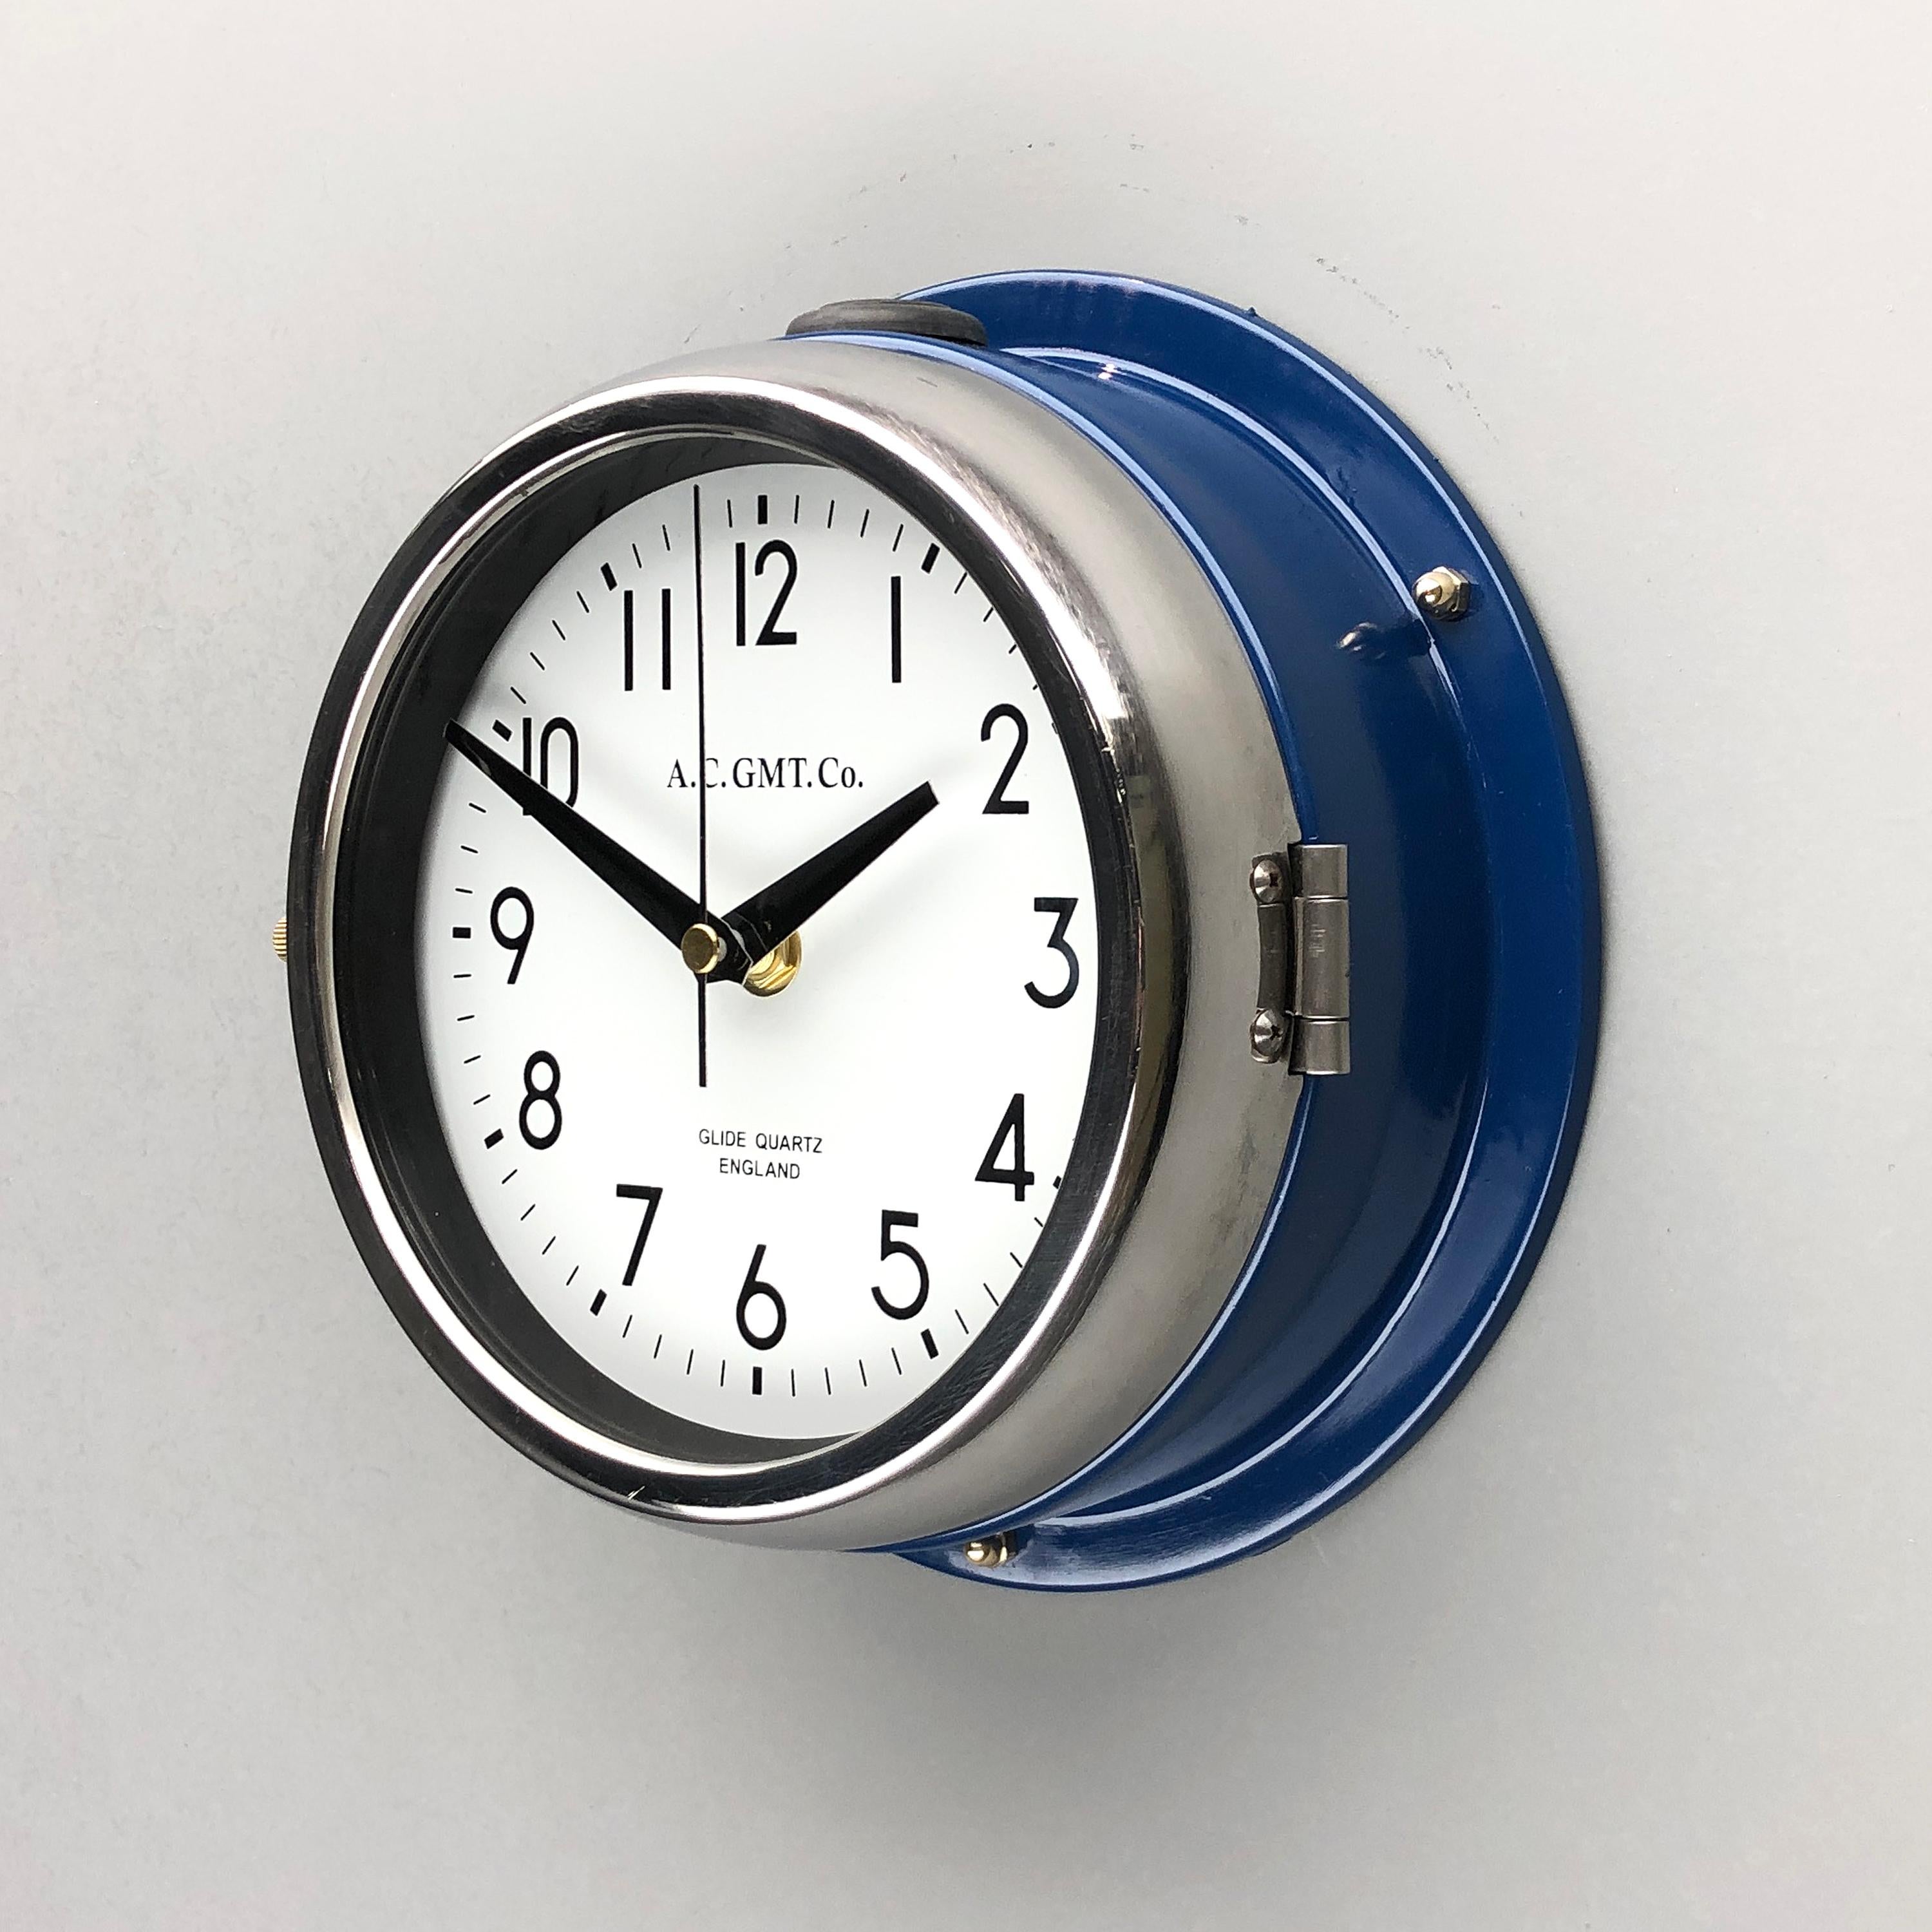 Steel 1970s British Classic Blue & Chrome Ac Gmt Co. Industrial Wall Clock White Dial For Sale